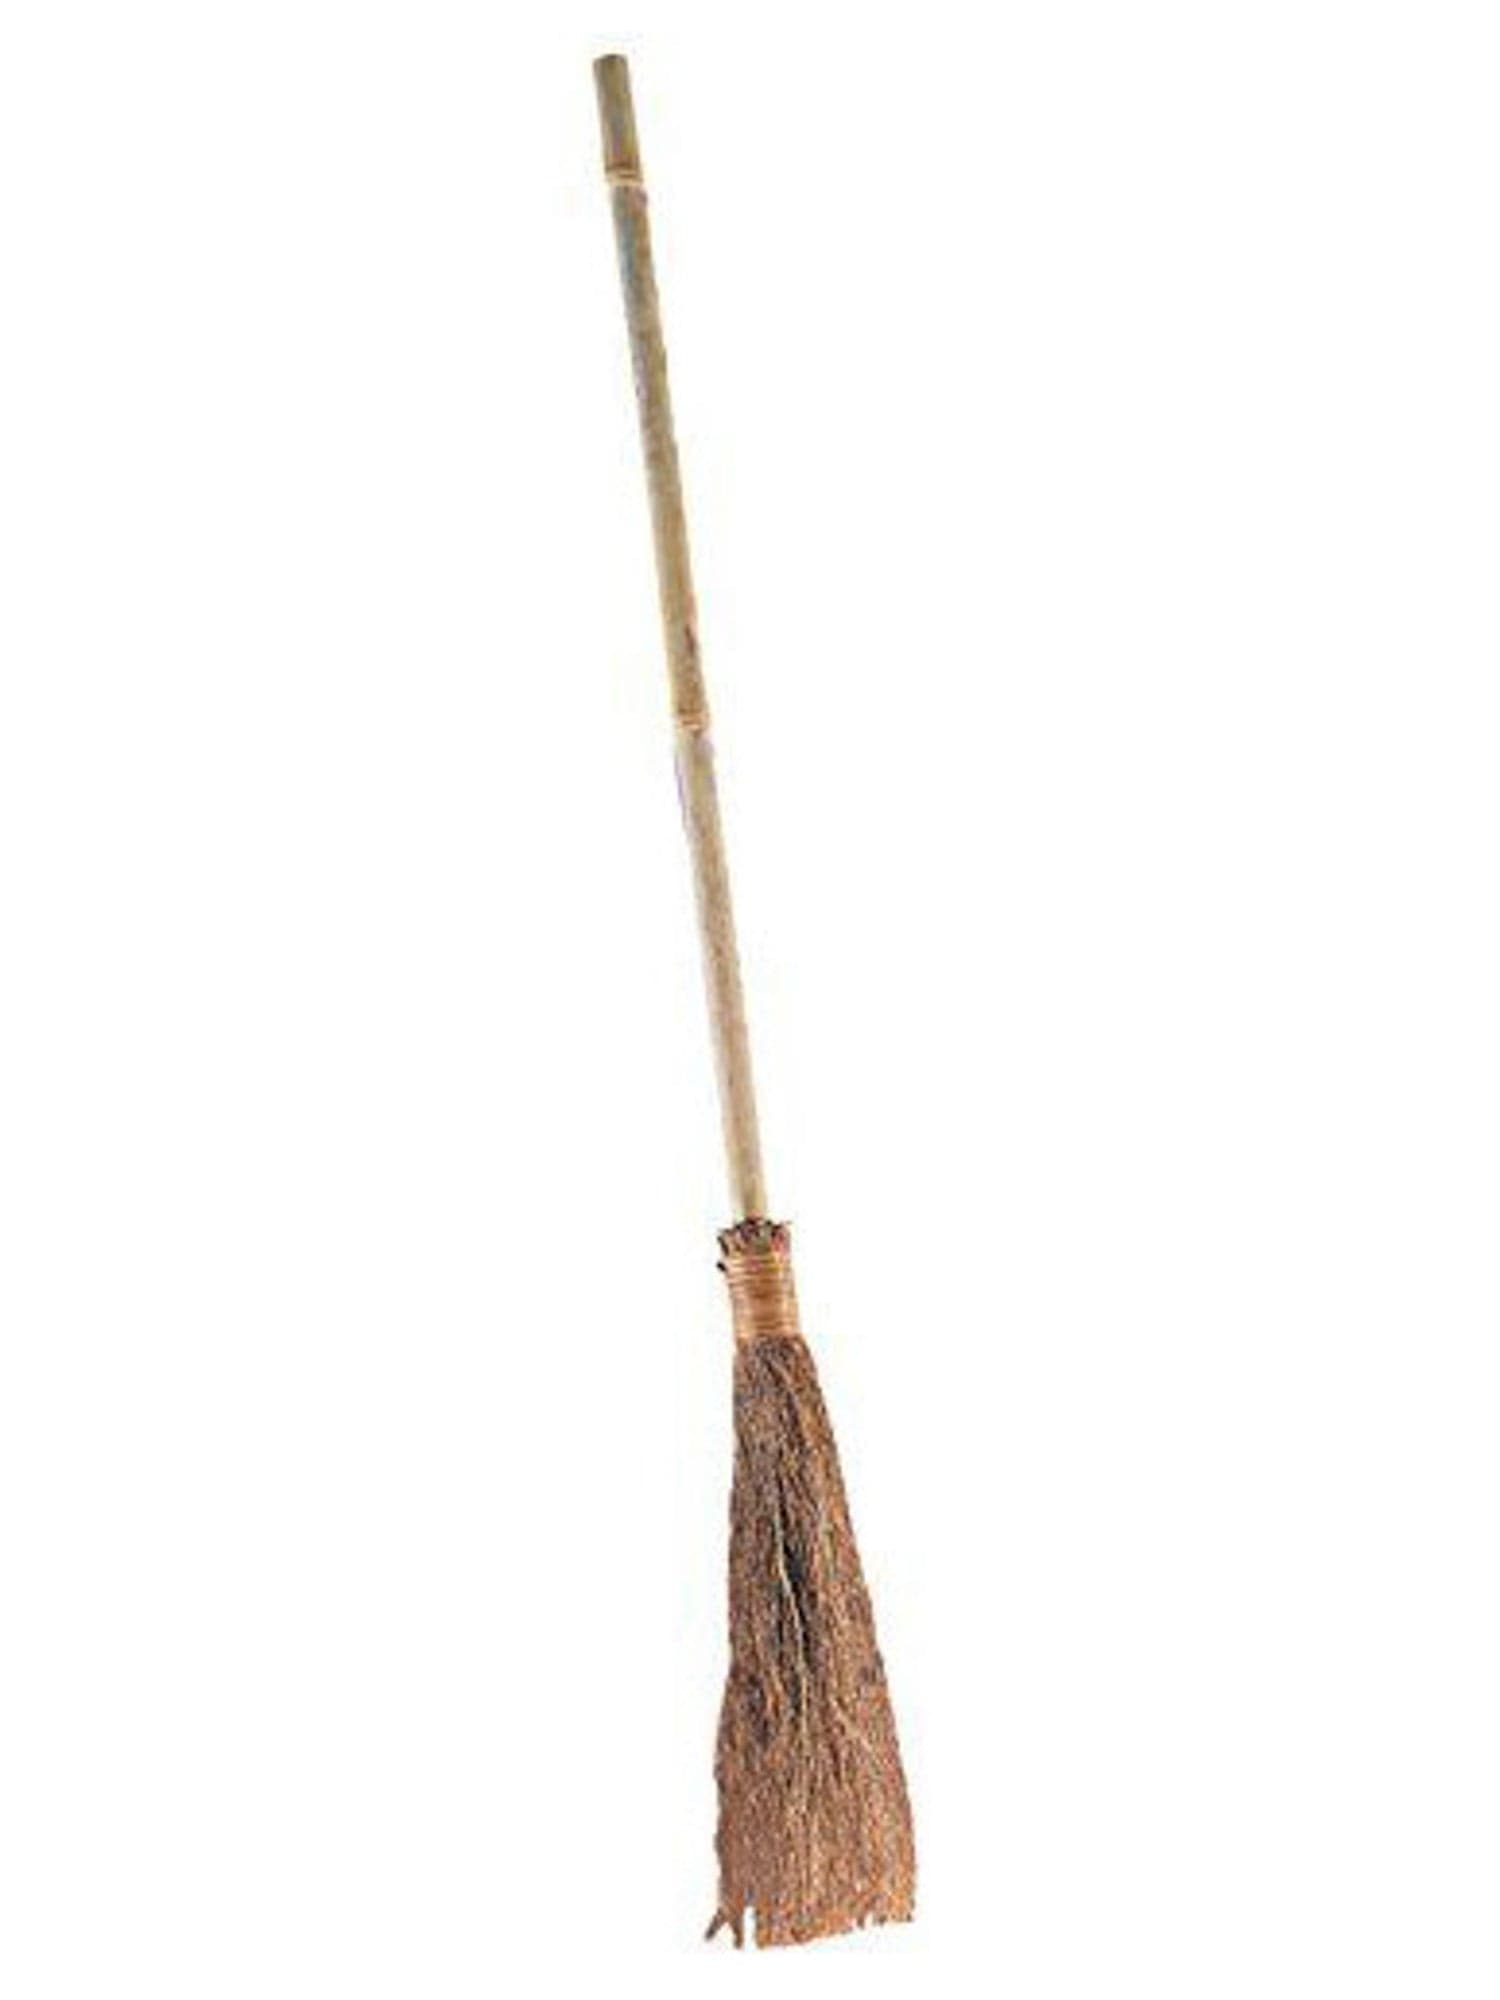 41 Inch Adult Witch Broom - costumes.com